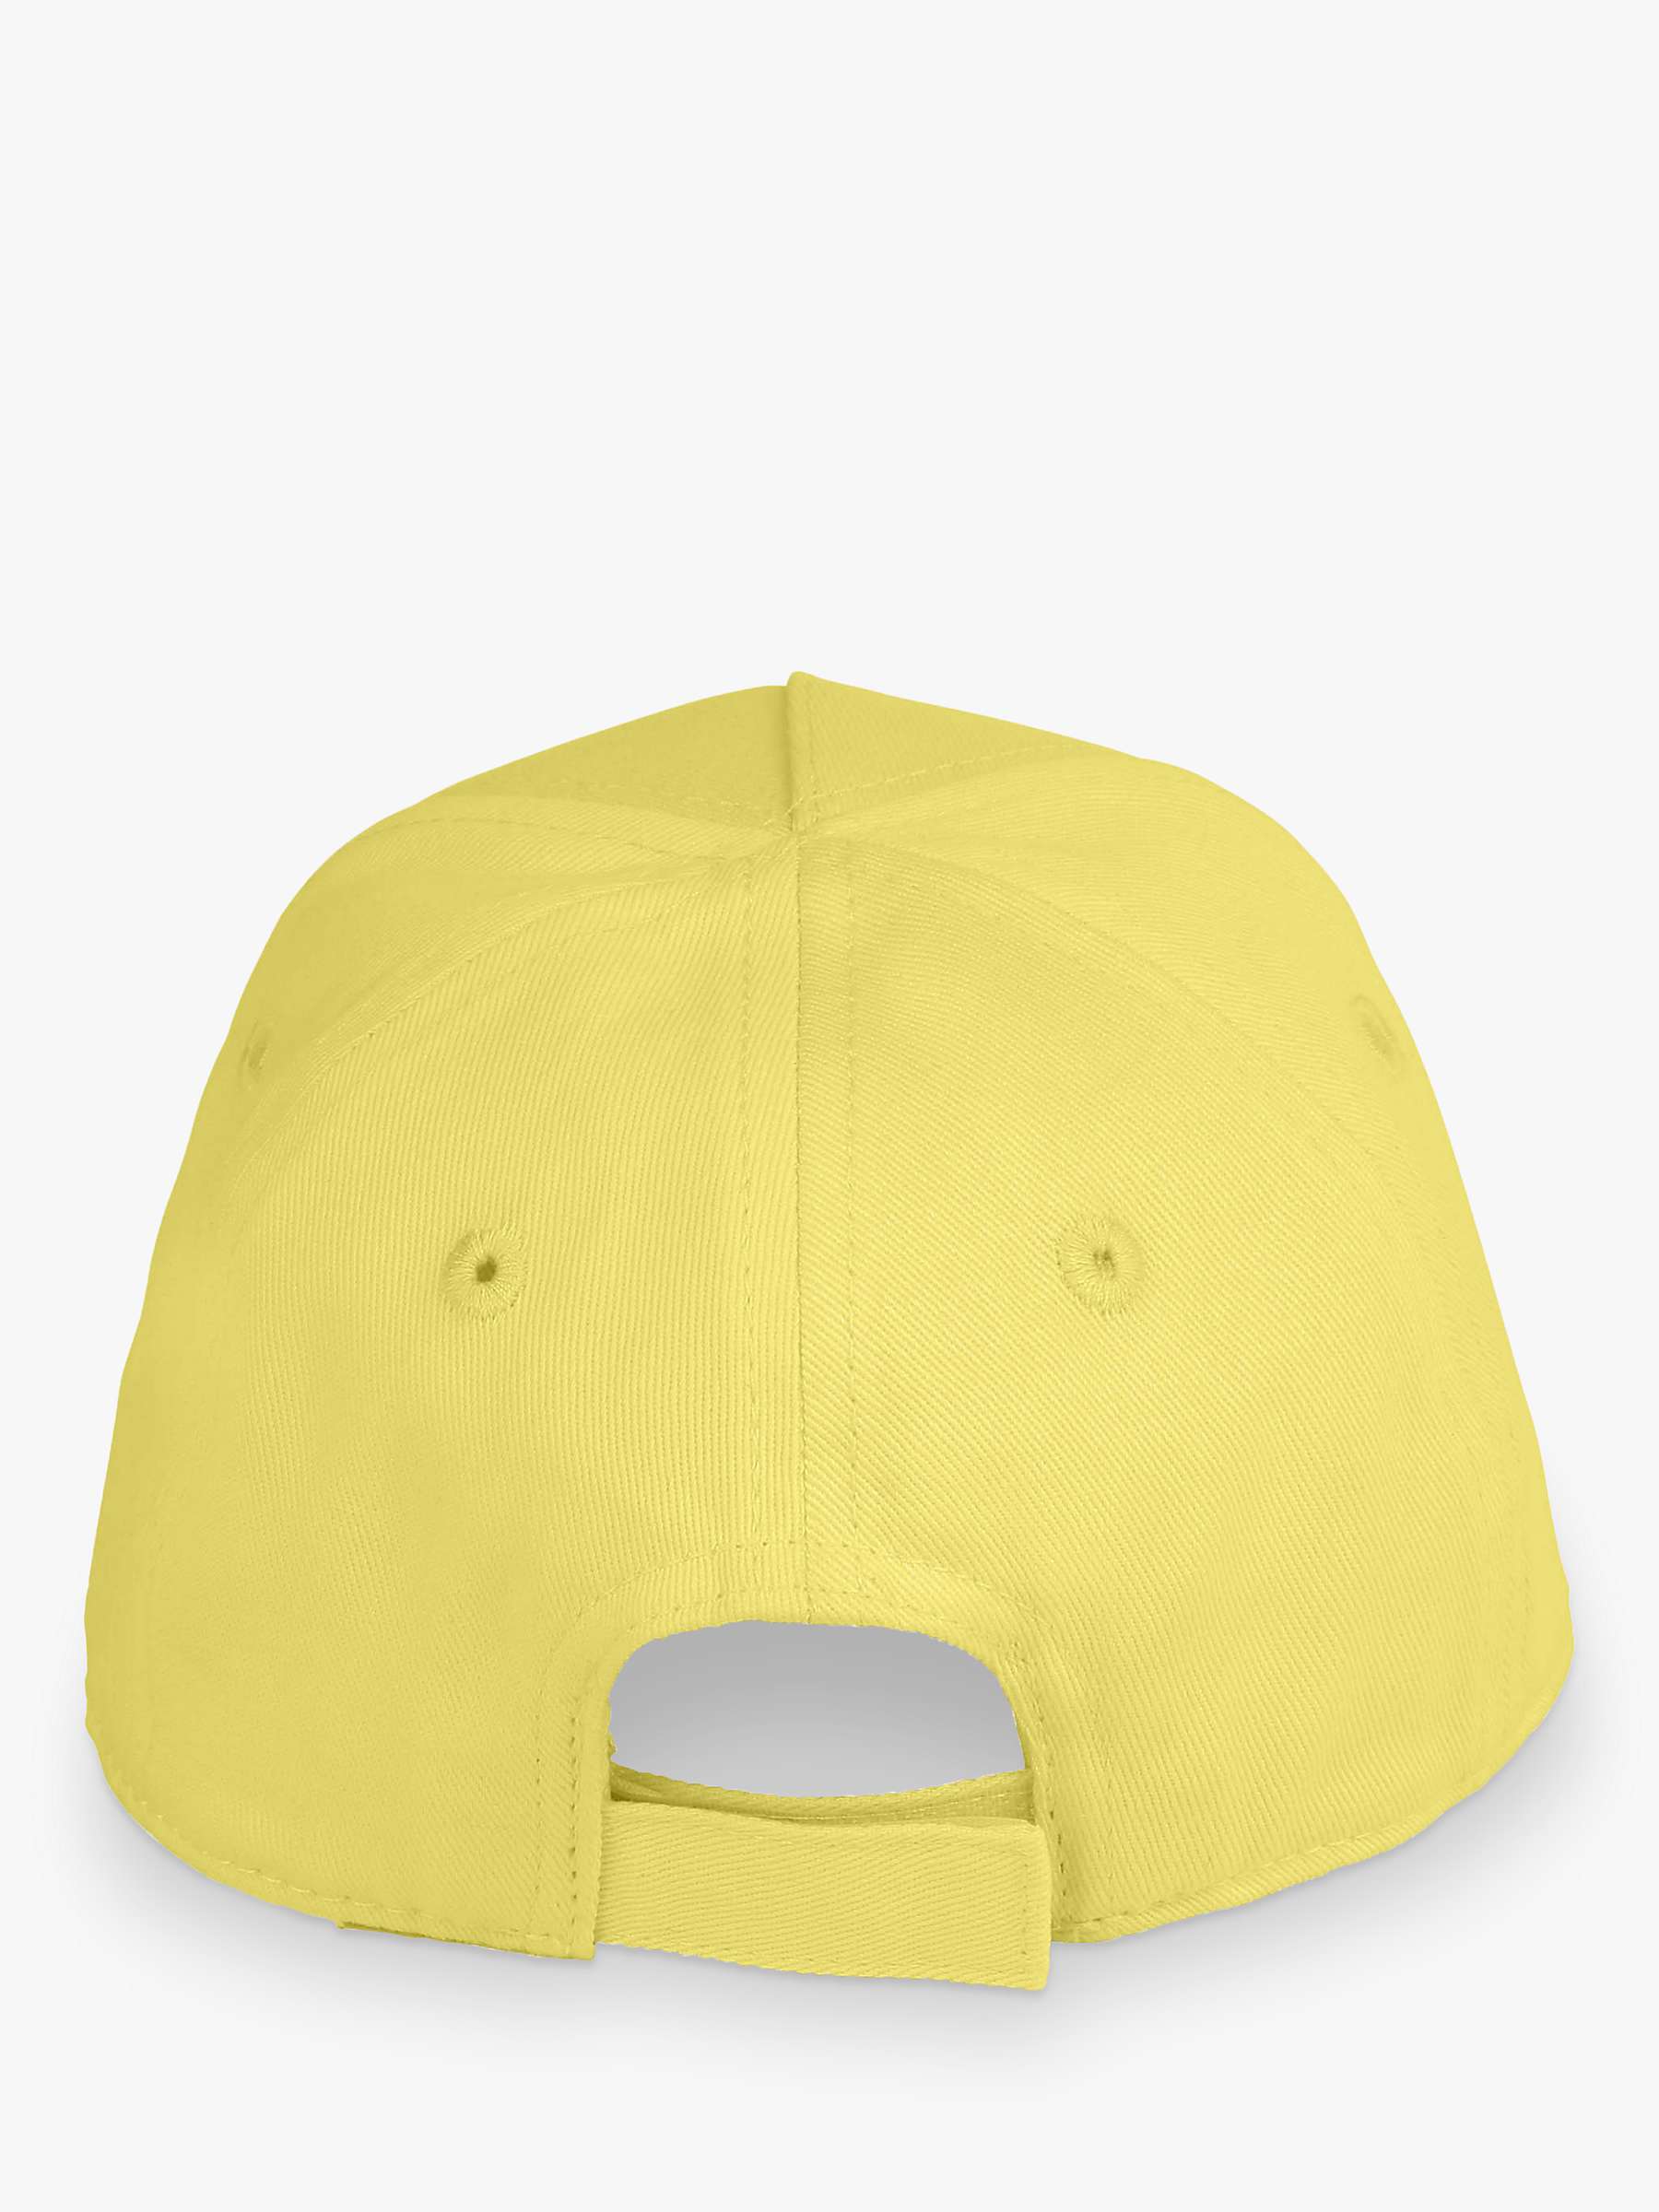 Buy BOSS Baby Logo Embroidered Baseball Hat Online at johnlewis.com